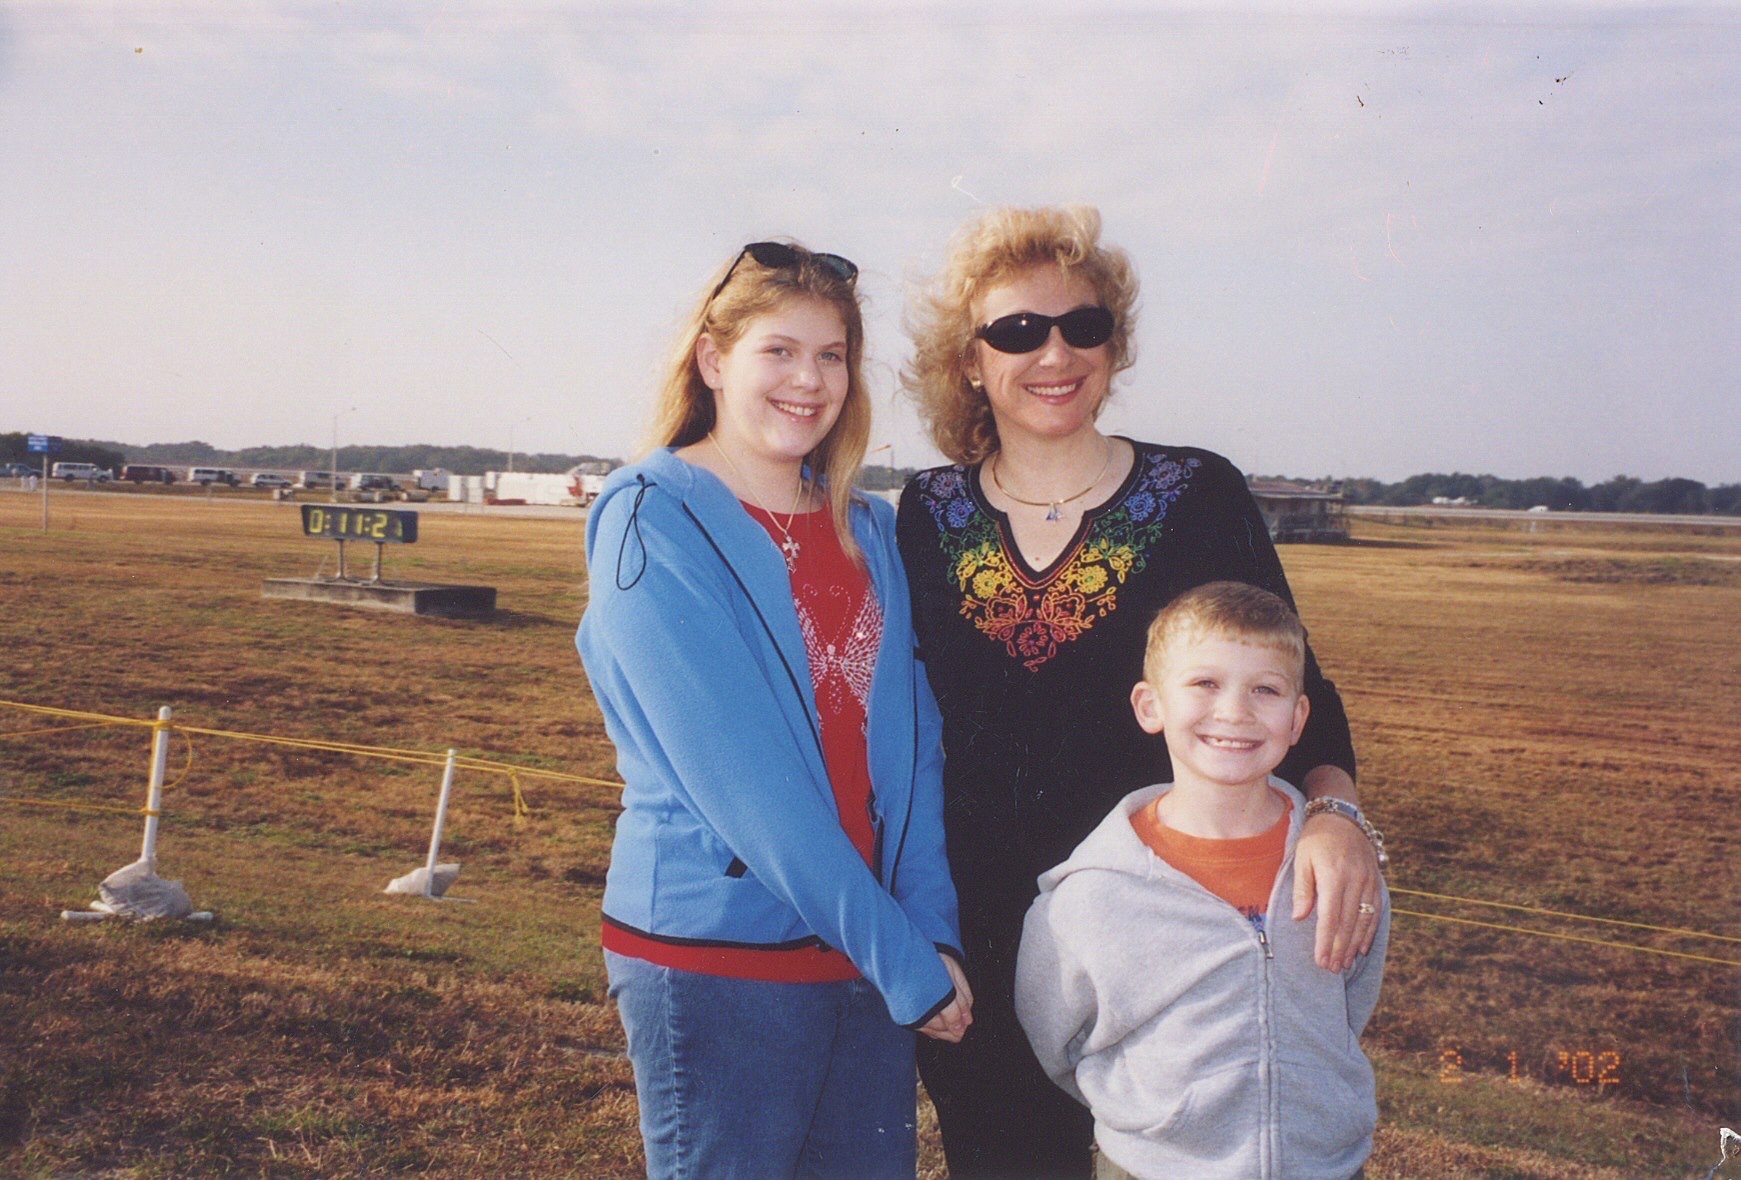 Waiting near the runway for the landing with countdown clock in background on February 1, 2003. Unbeknownst to them the Columbia has already fallen apart. (Copy)